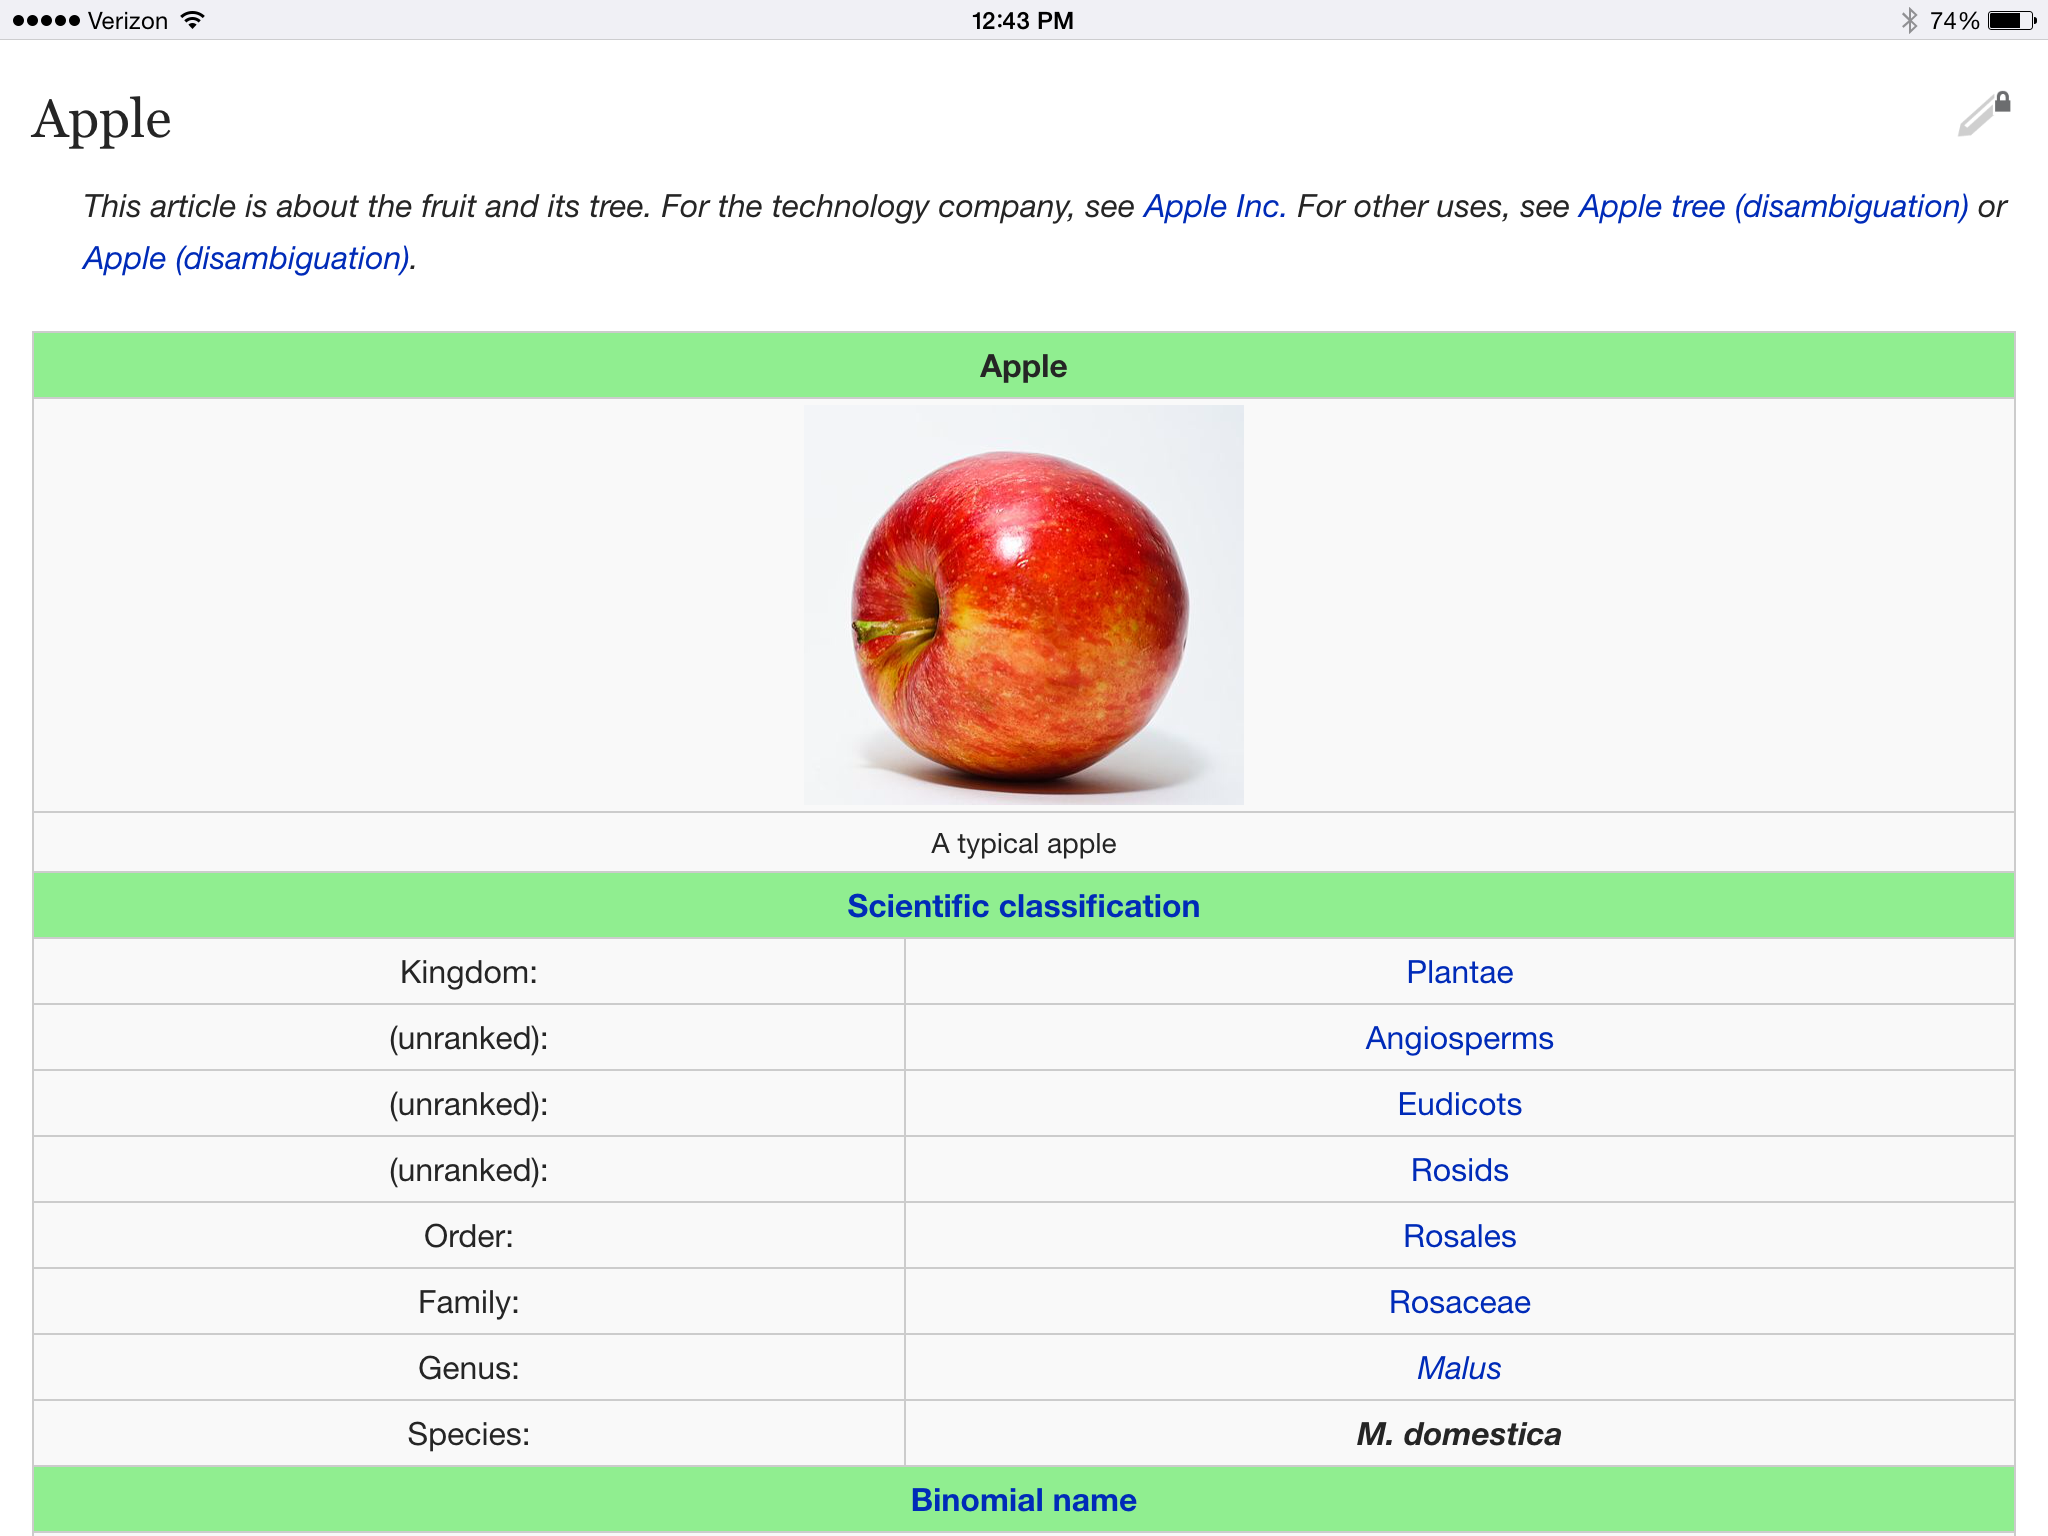 Wikipedia app re-launches on App Store ahead of iOS 8 integration - 9to5Mac